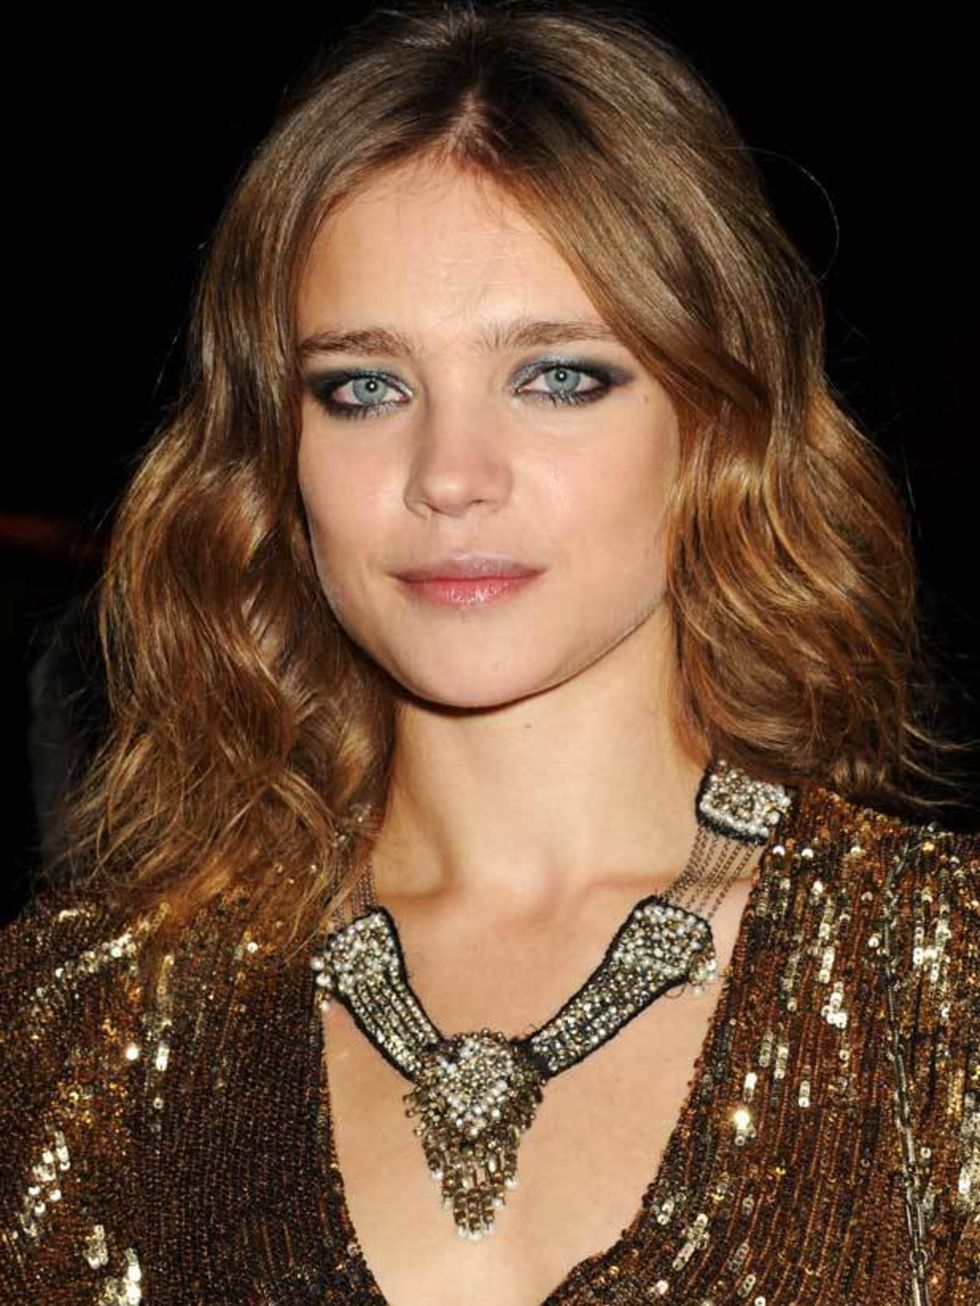 <p><a href="http://www.elleuk.com/starstyle/style-files/%28section%29/natalia-vodianova">Natalie Vodianova</a> wears <a href="http://www.elleuk.com/catwalk/collections/balmain/autumn-winter-2010/collection">Balmain</a> to an awards ceremony in London, 1 N